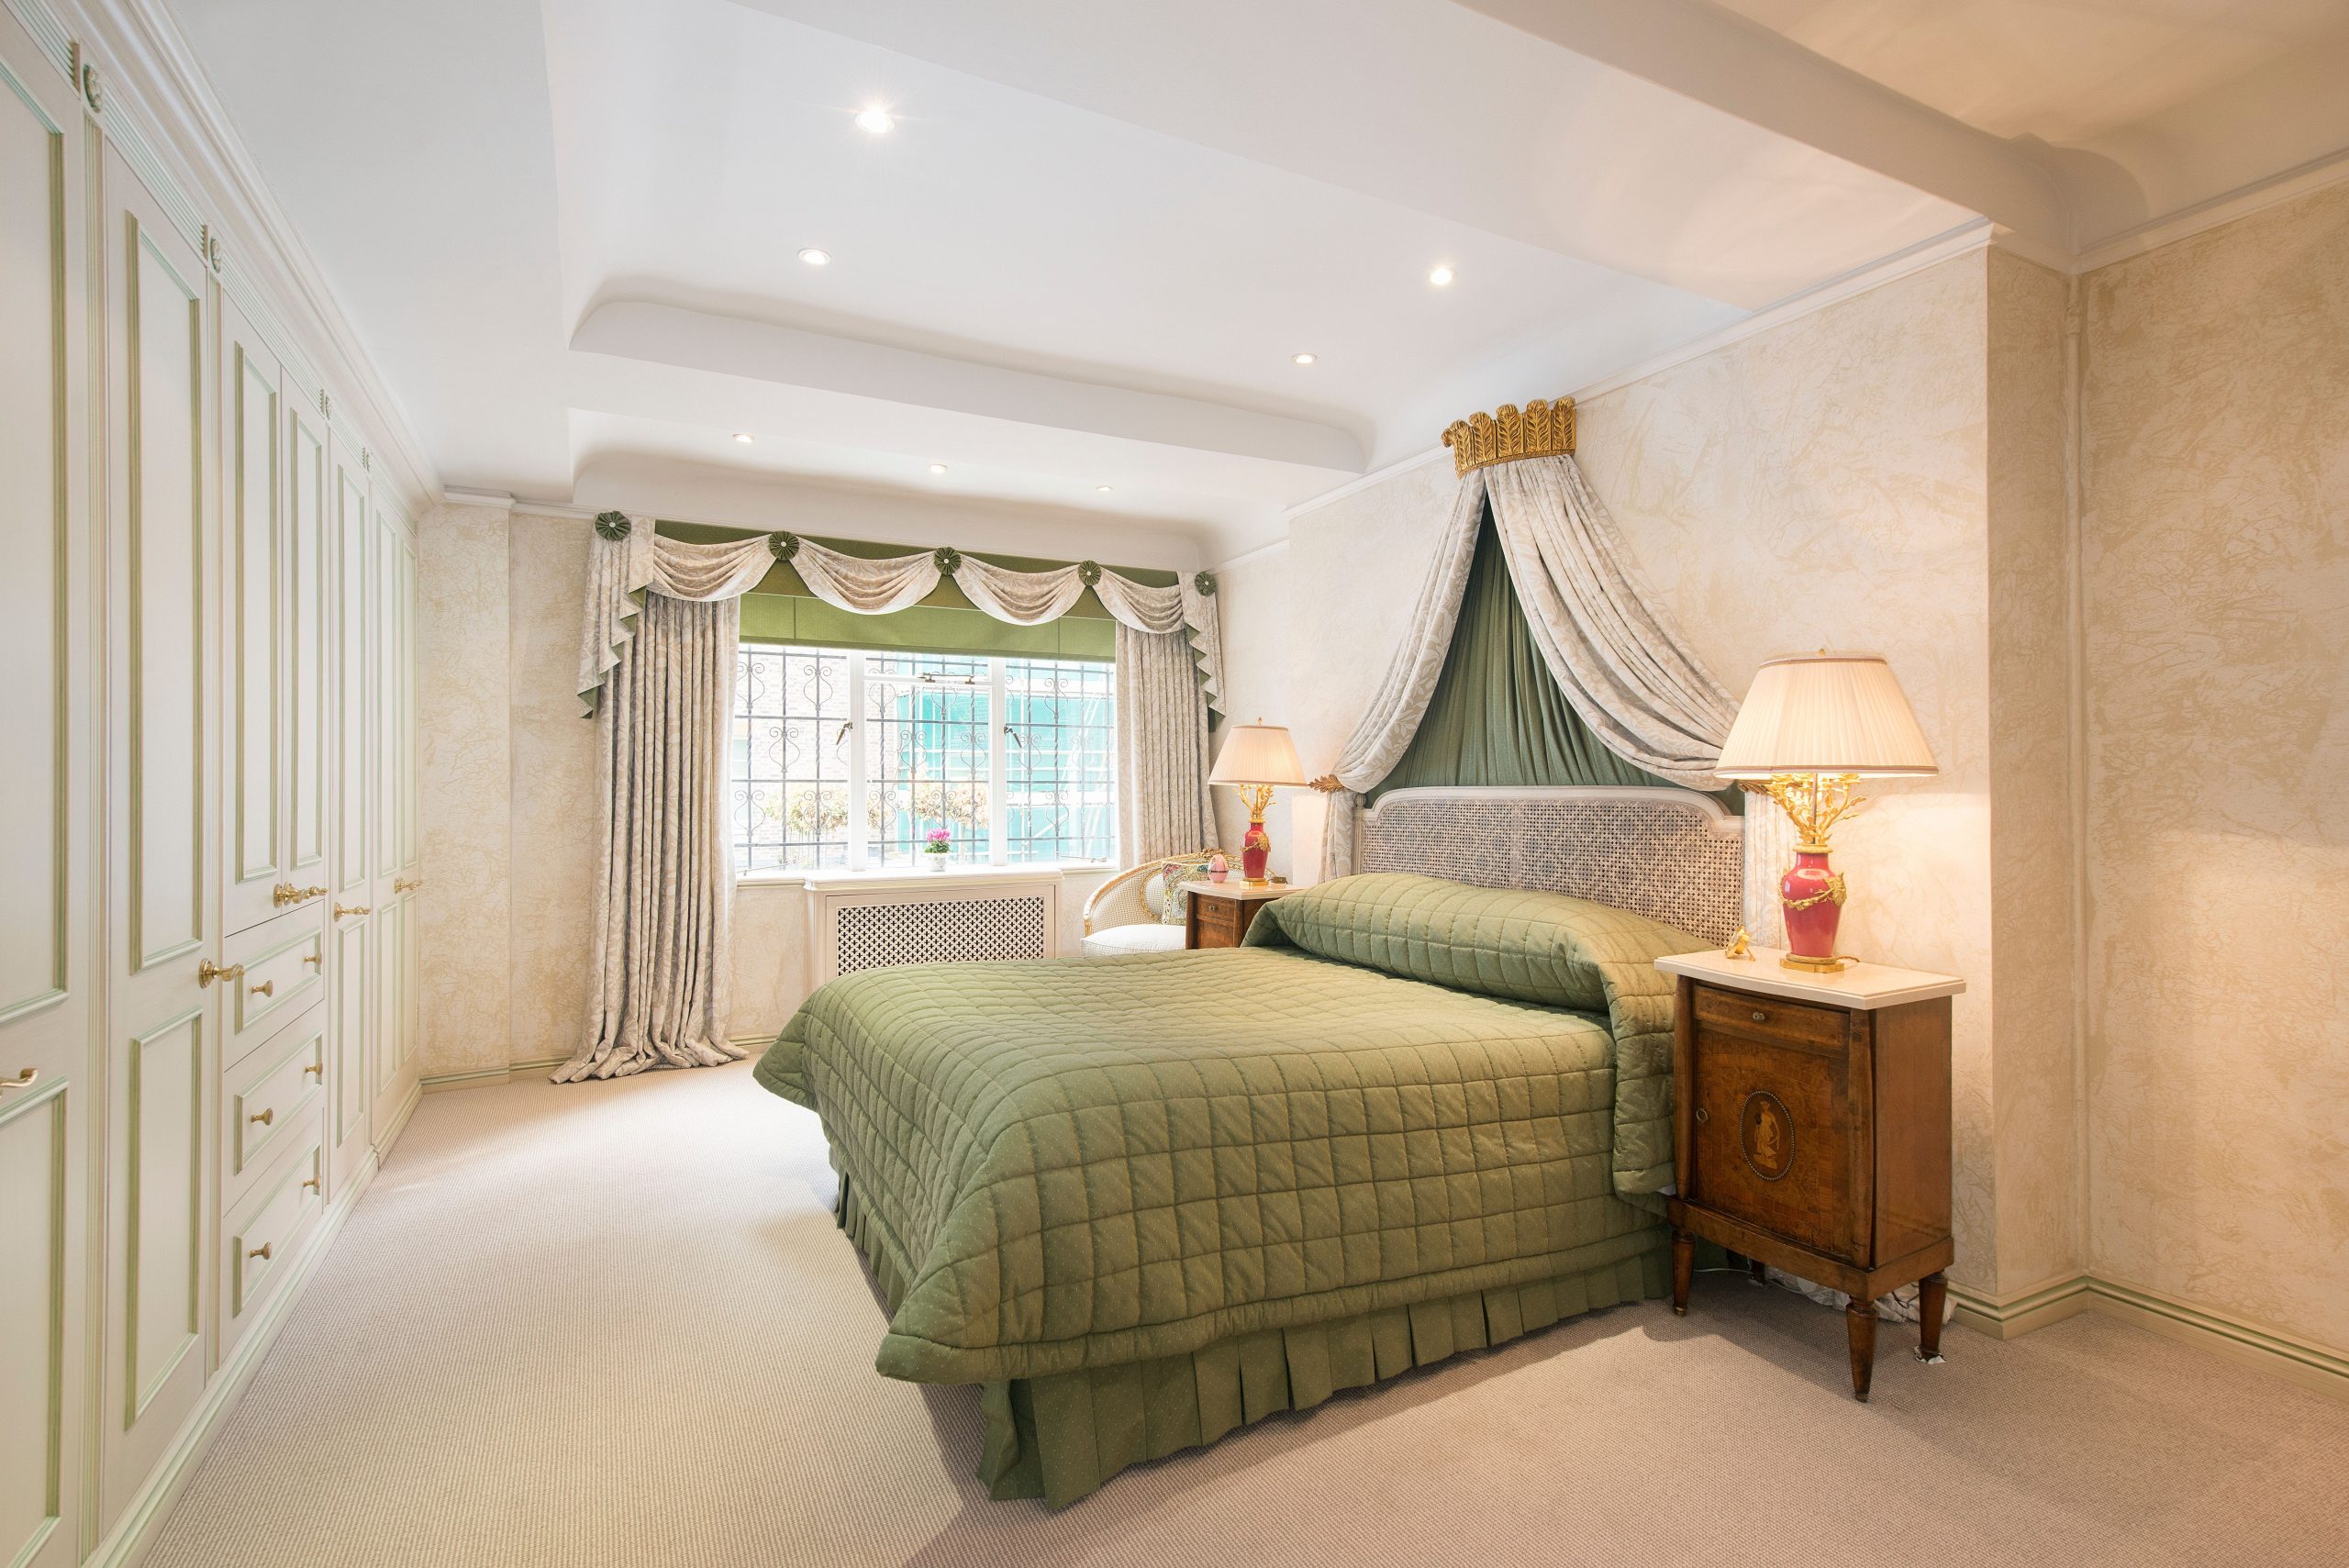 One of six bedrooms in Farm House, Mayfair.